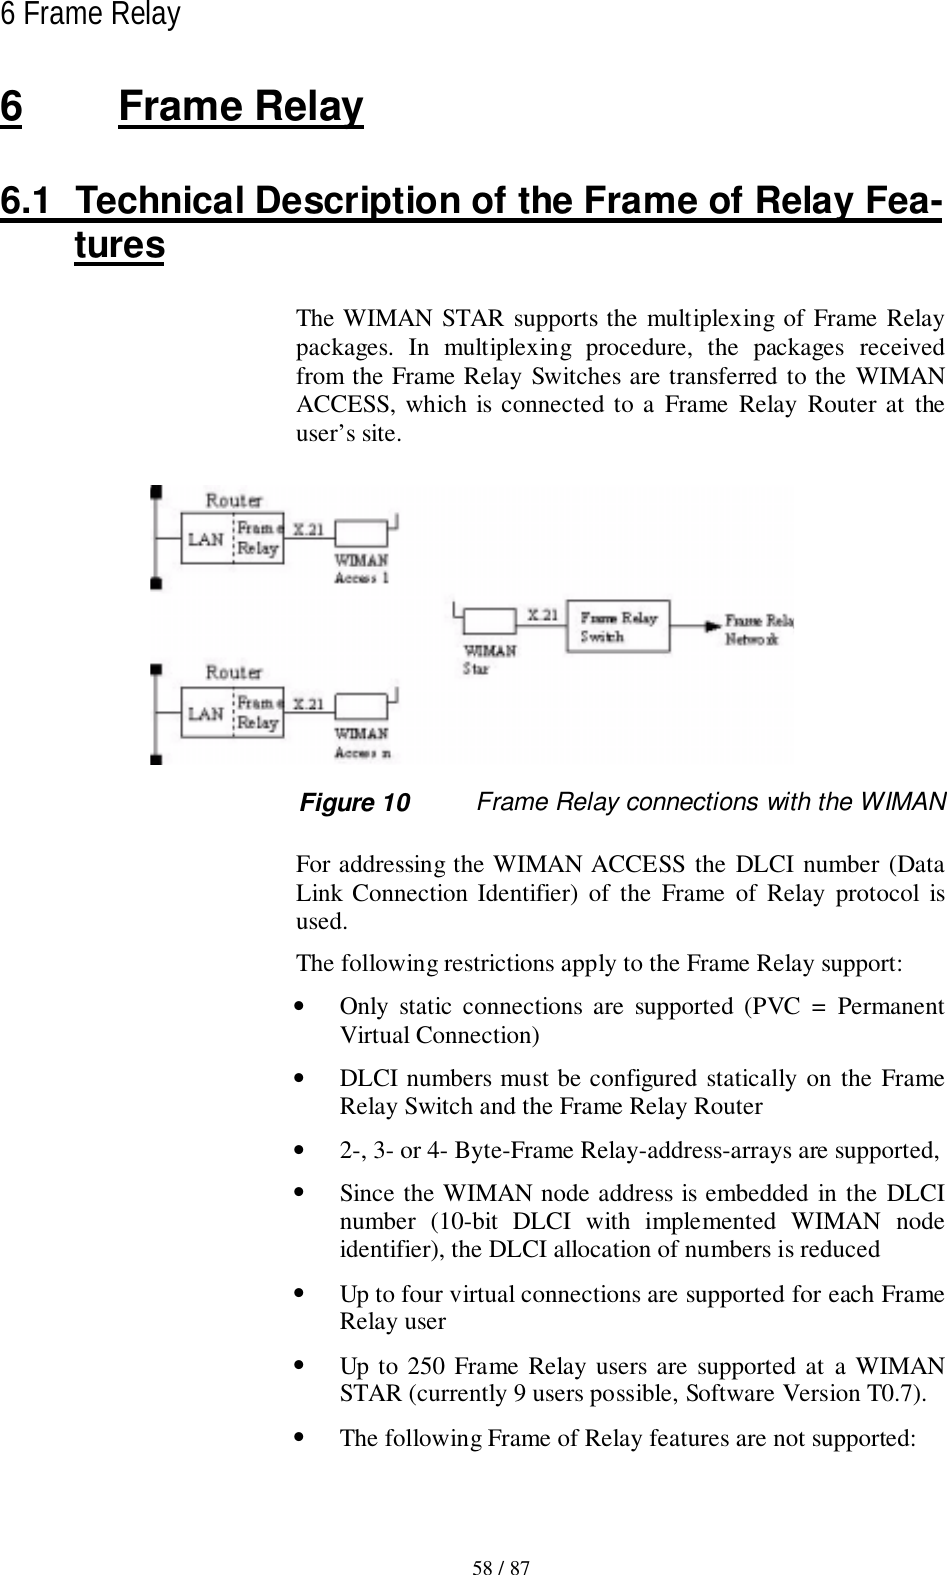 58 / 876 Frame Relay6 Frame Relay6.1  Technical Description of the Frame of Relay Fea-turesThe WIMAN STAR supports the multiplexing of Frame Relaypackages. In multiplexing procedure, the packages receivedfrom the Frame Relay Switches are transferred to the WIMANACCESS, which is connected to a Frame Relay Router at theuser’s site. Figure 10 Frame Relay connections with the WIMANFor addressing the WIMAN ACCESS the DLCI number (DataLink Connection Identifier) of the Frame of Relay protocol isused.The following restrictions apply to the Frame Relay support:• Only static connections are supported (PVC = PermanentVirtual Connection)• DLCI numbers must be configured statically on the FrameRelay Switch and the Frame Relay Router• 2-, 3- or 4- Byte-Frame Relay-address-arrays are supported,• Since the WIMAN node address is embedded in the DLCInumber (10-bit DLCI with implemented WIMAN nodeidentifier), the DLCI allocation of numbers is reduced• Up to four virtual connections are supported for each FrameRelay user• Up to 250 Frame Relay users are supported at a WIMANSTAR (currently 9 users possible, Software Version T0.7).• The following Frame of Relay features are not supported: